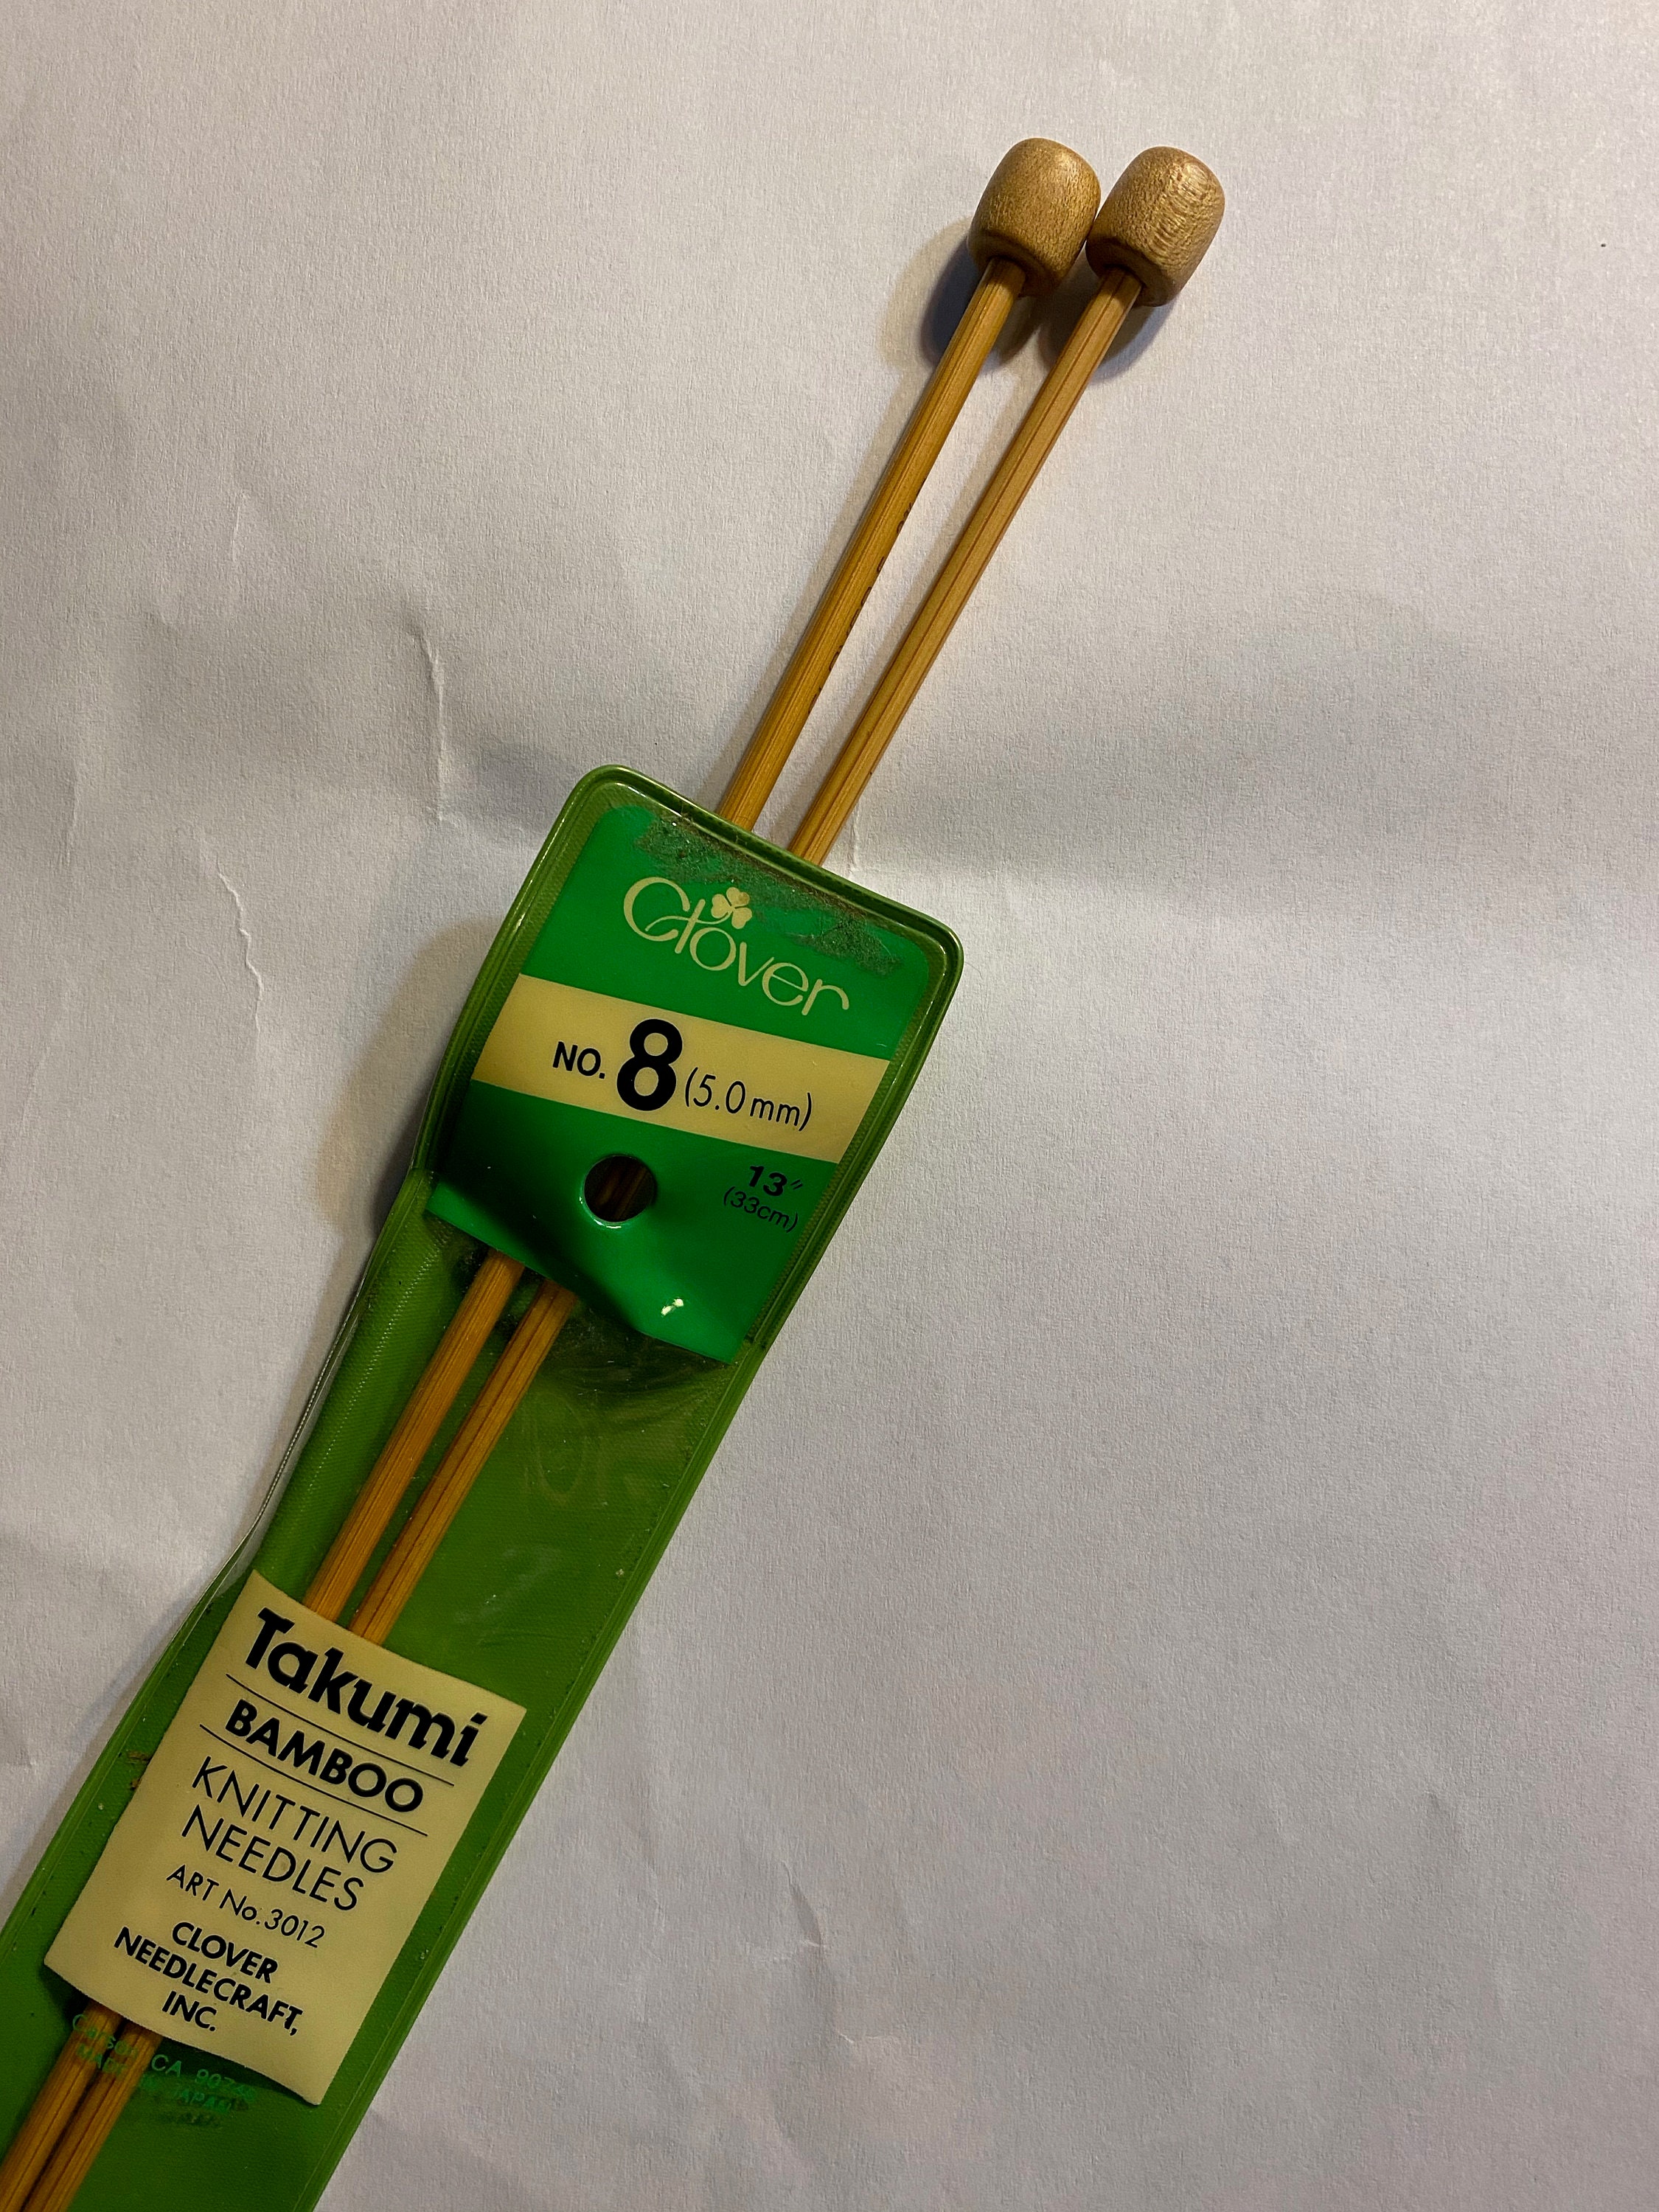 KNITTING NEEDLES Size 8 5.0mm Bamboo Premium Clover 13 Long in Original  Package 